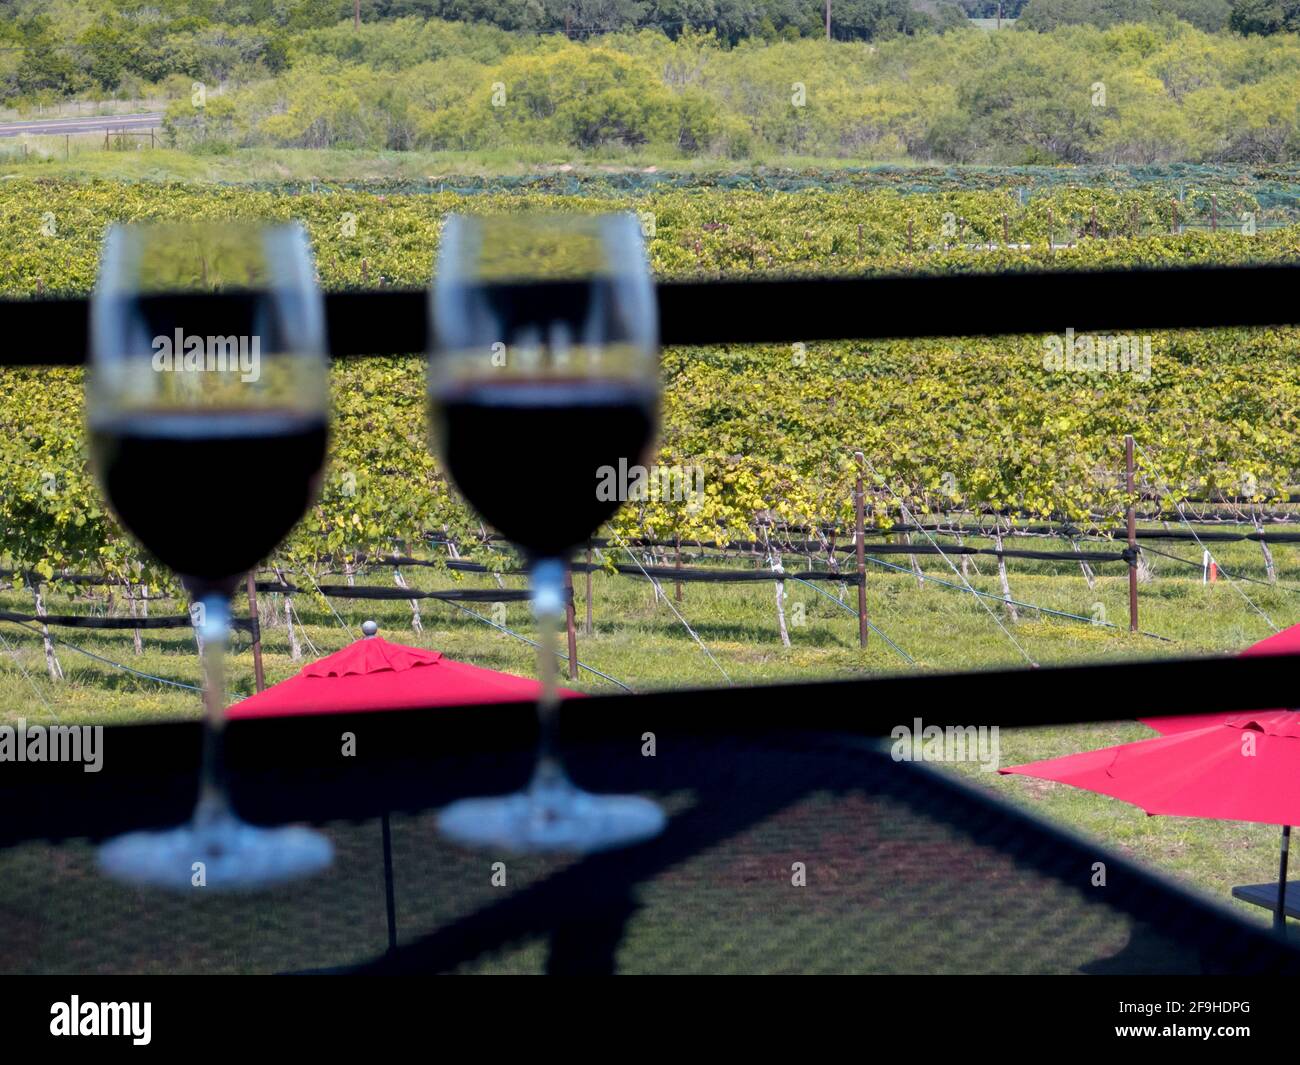 Two wine glasses with view of grape vineyard in distance Stock Photo